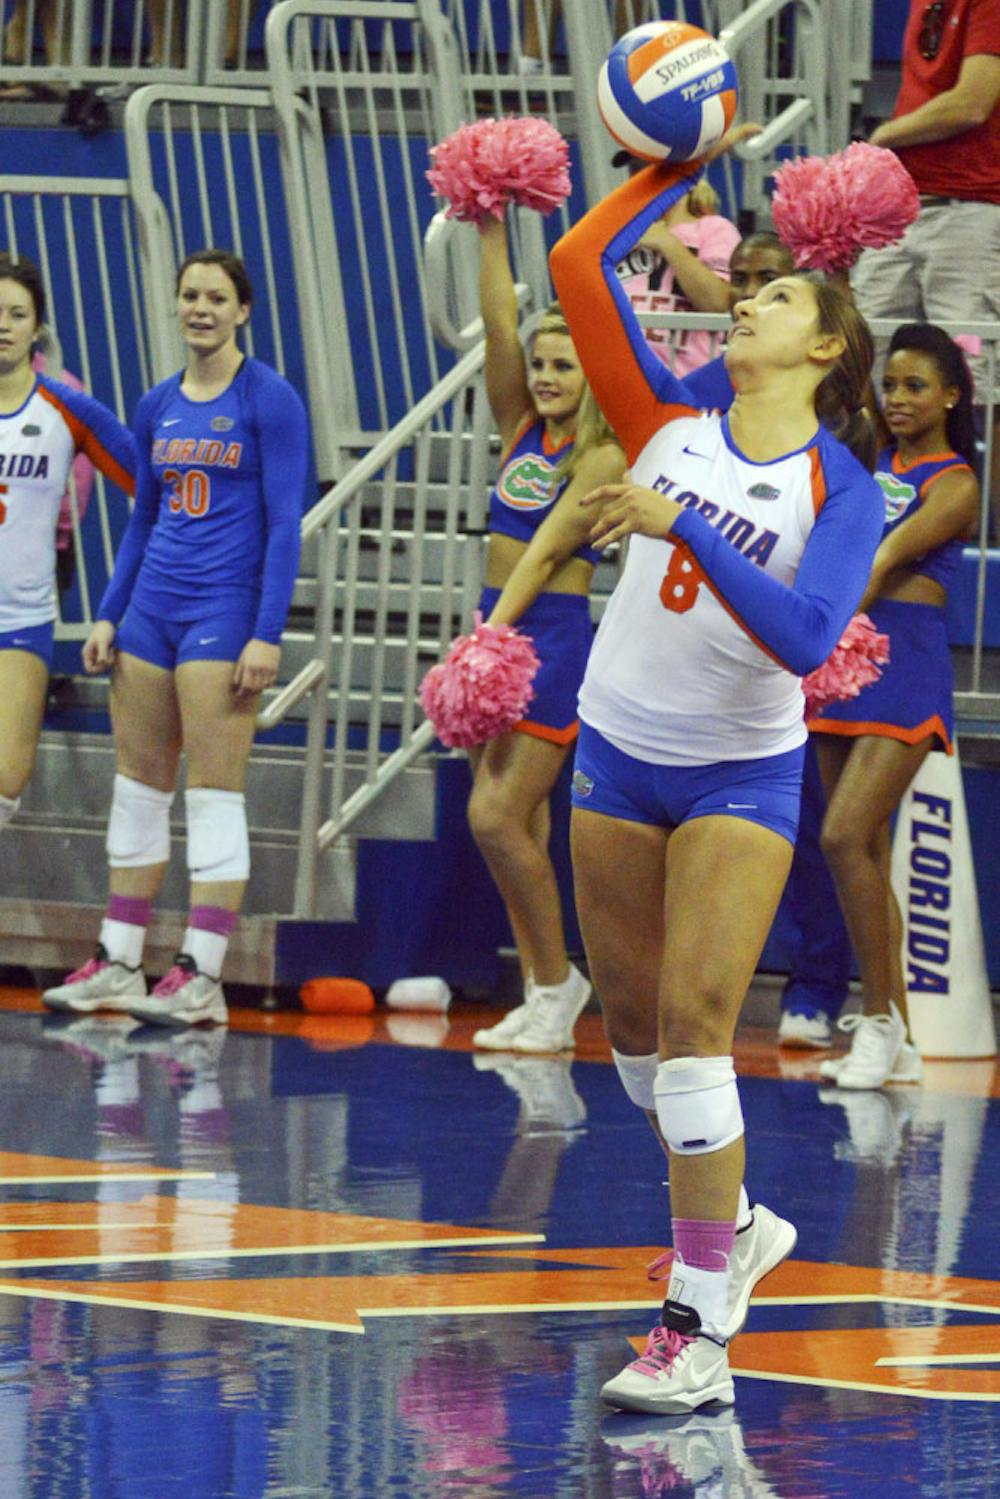 <p>Sam Dubiel serves the ball during Florida's 3-0 win against Texas A&amp;M on Saturday in the O'Connell Center.</p>